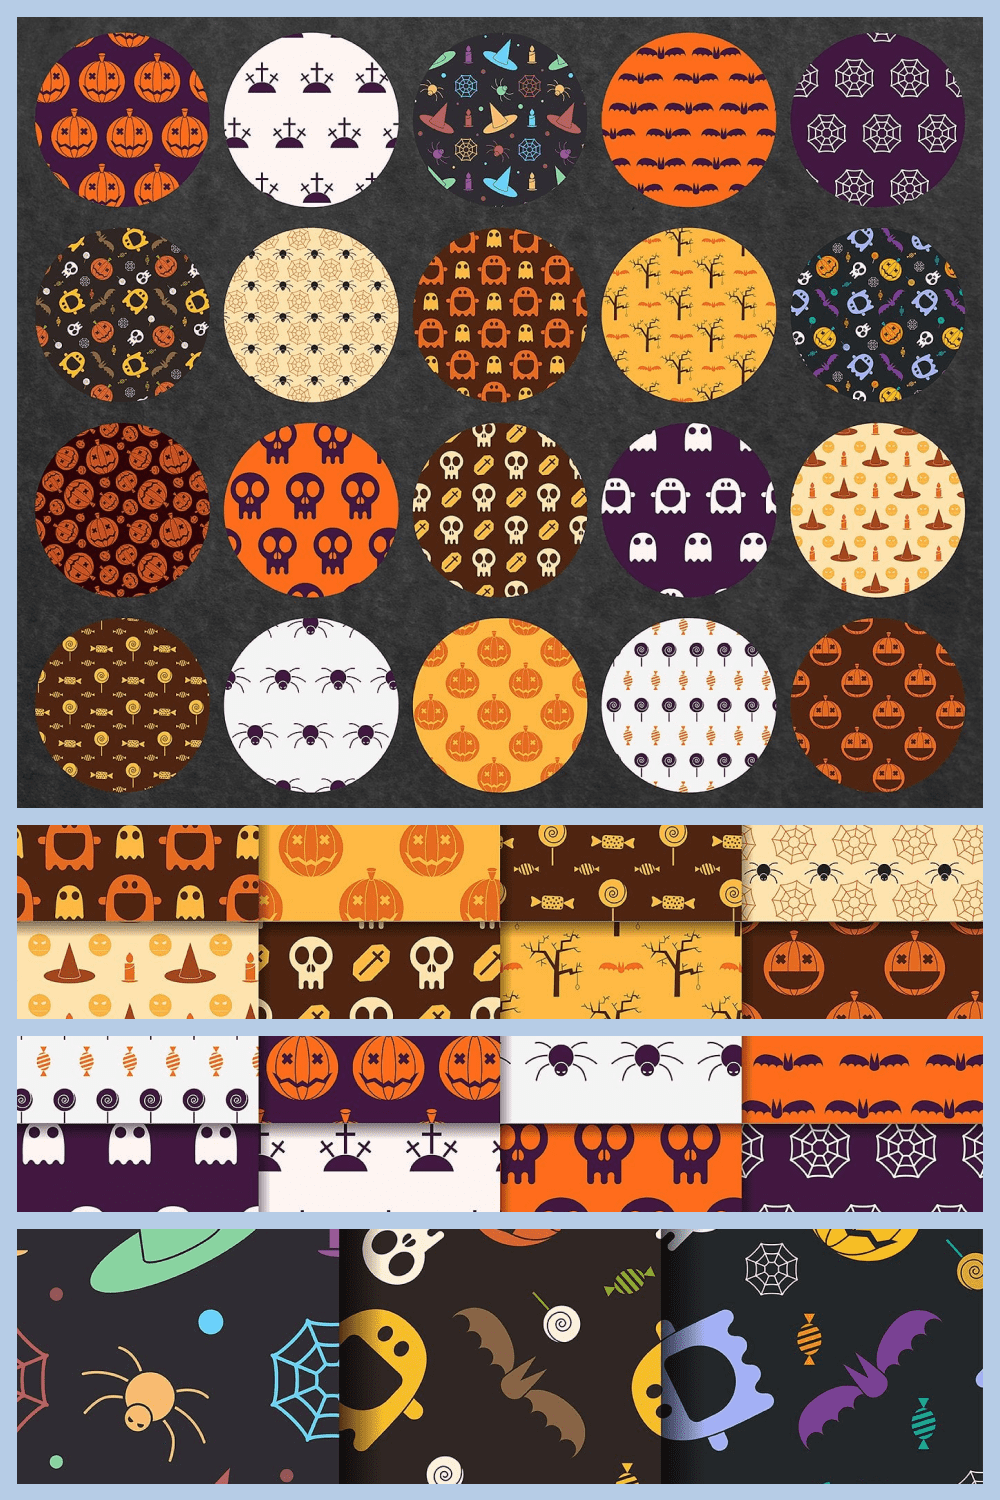 It is a treasure trove of Halloween backgrounds and textures.